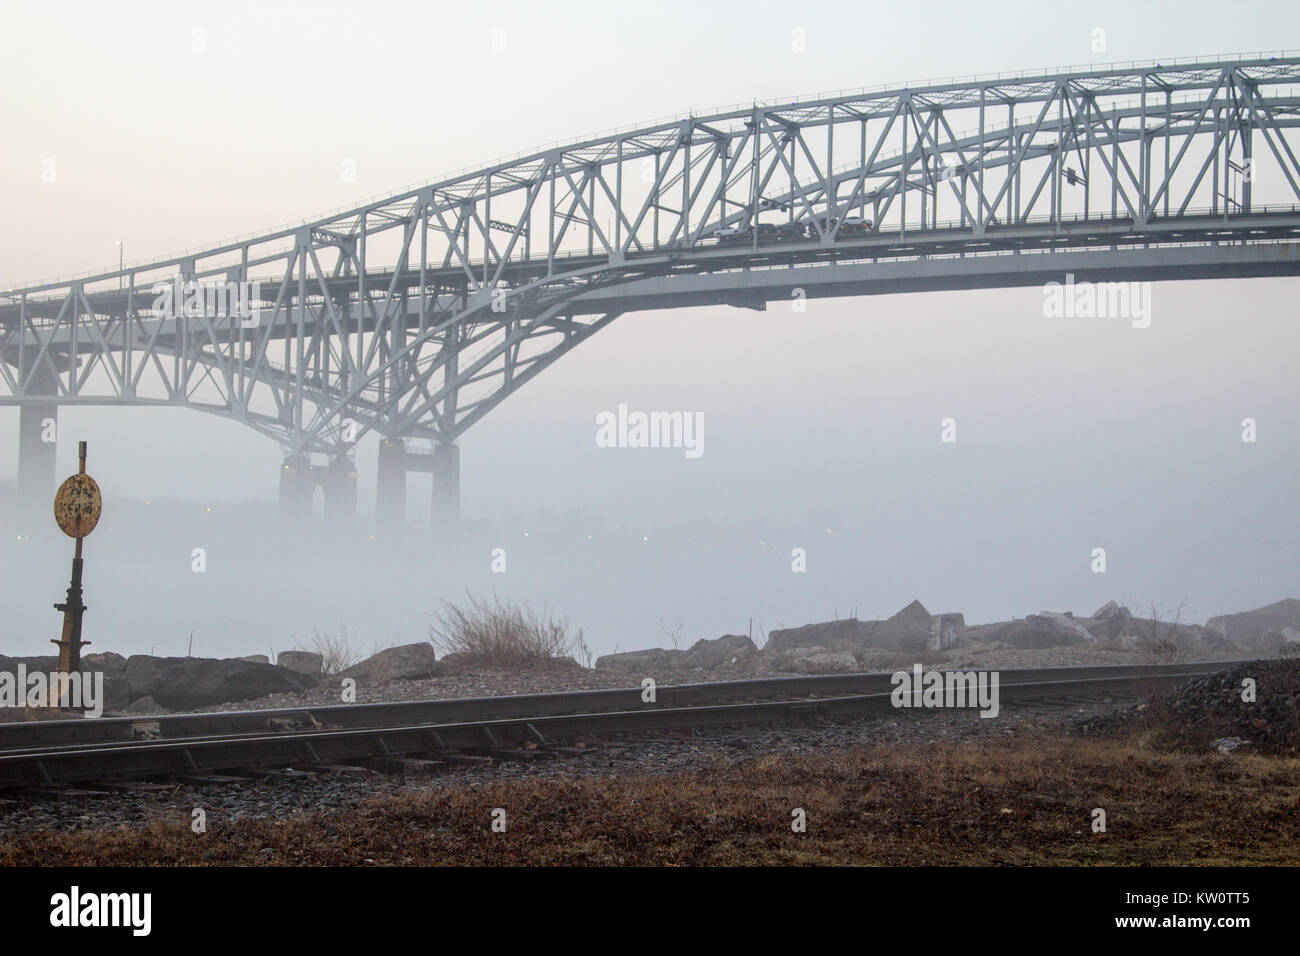 The International Blue Water Bridge in heavy fog with railroad tracks in the foreground. The Blue Water Bridges connects the USA and Ontario, Canada. Stock Photo